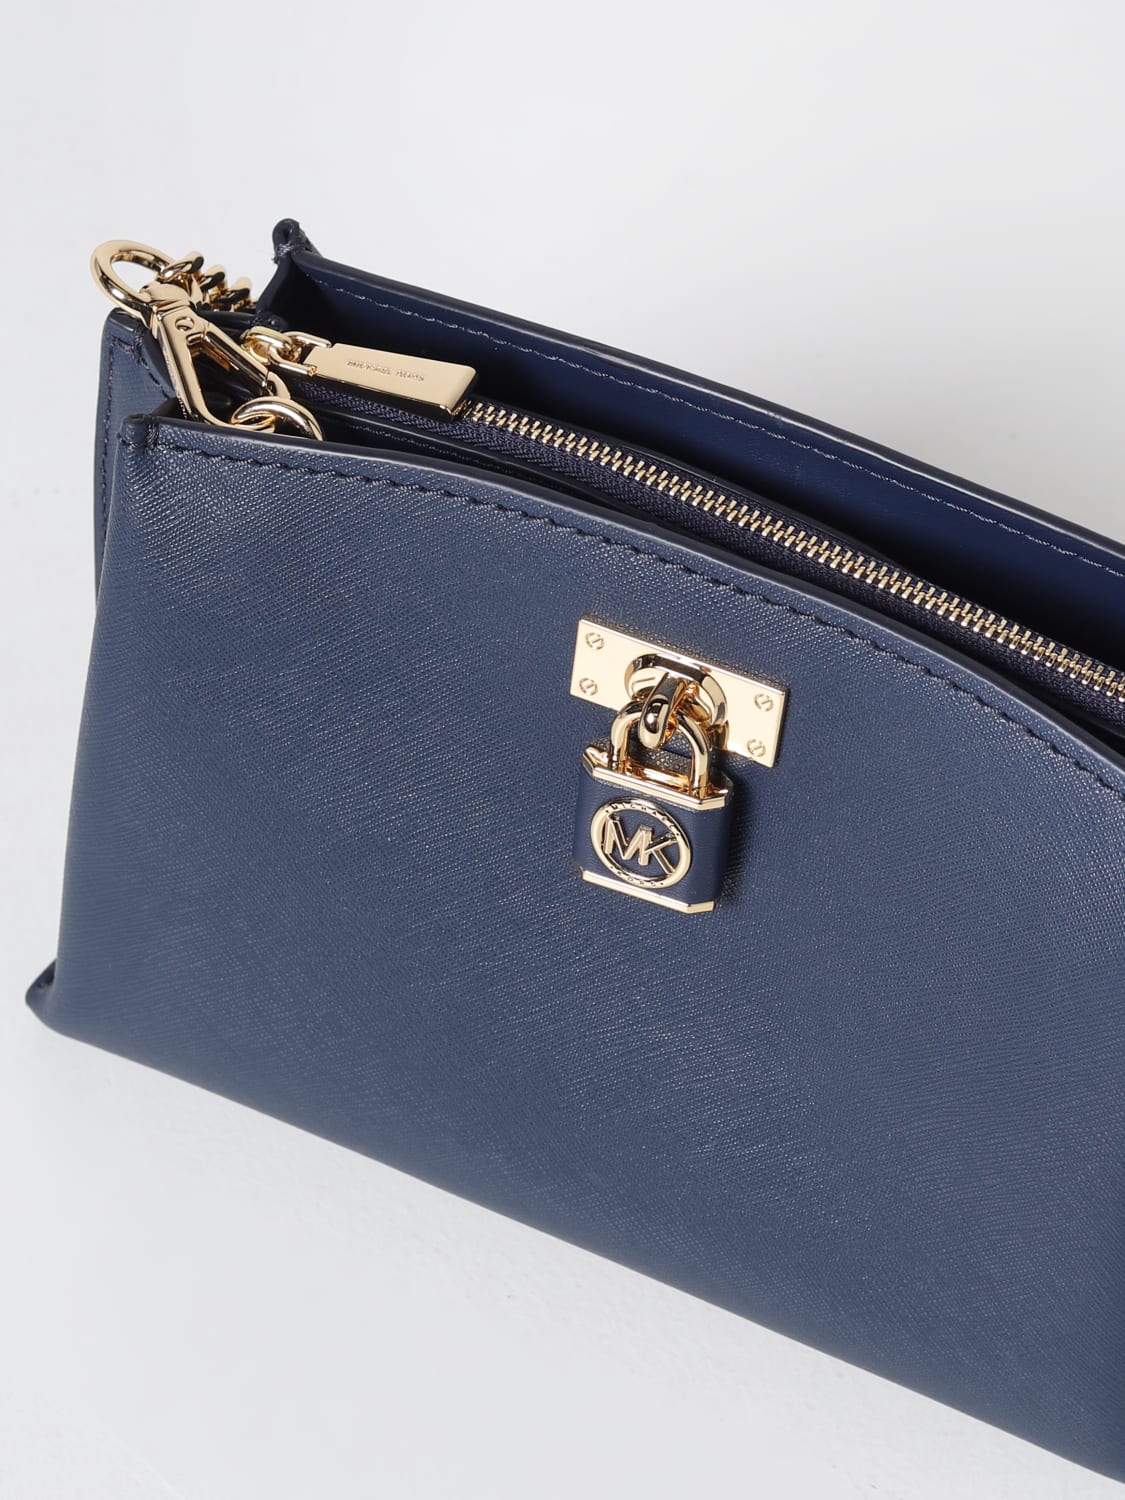 Michael Kors Outlet: Michael Ruby bag in saffiano leather - Navy